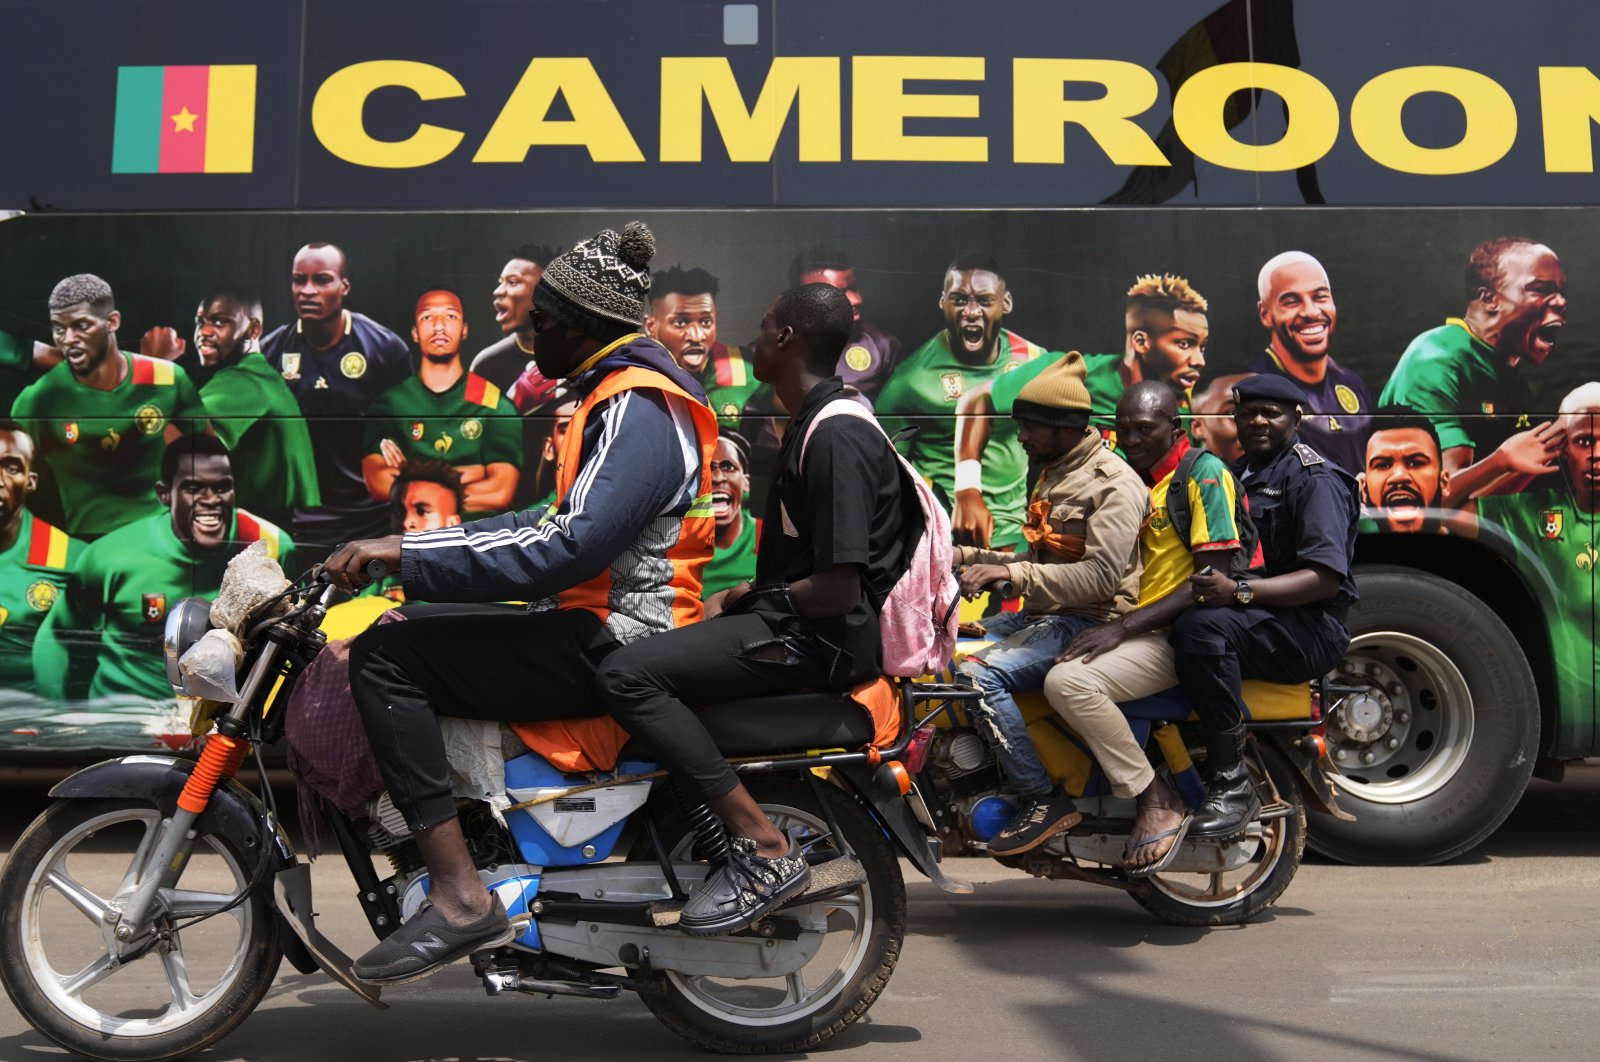 People on motorcycles ride past a bus painted in traditional colors of the Cameroon national team, Yaounde, Cameroon, Monday, Jan. 31, 2022. (AP Photo)